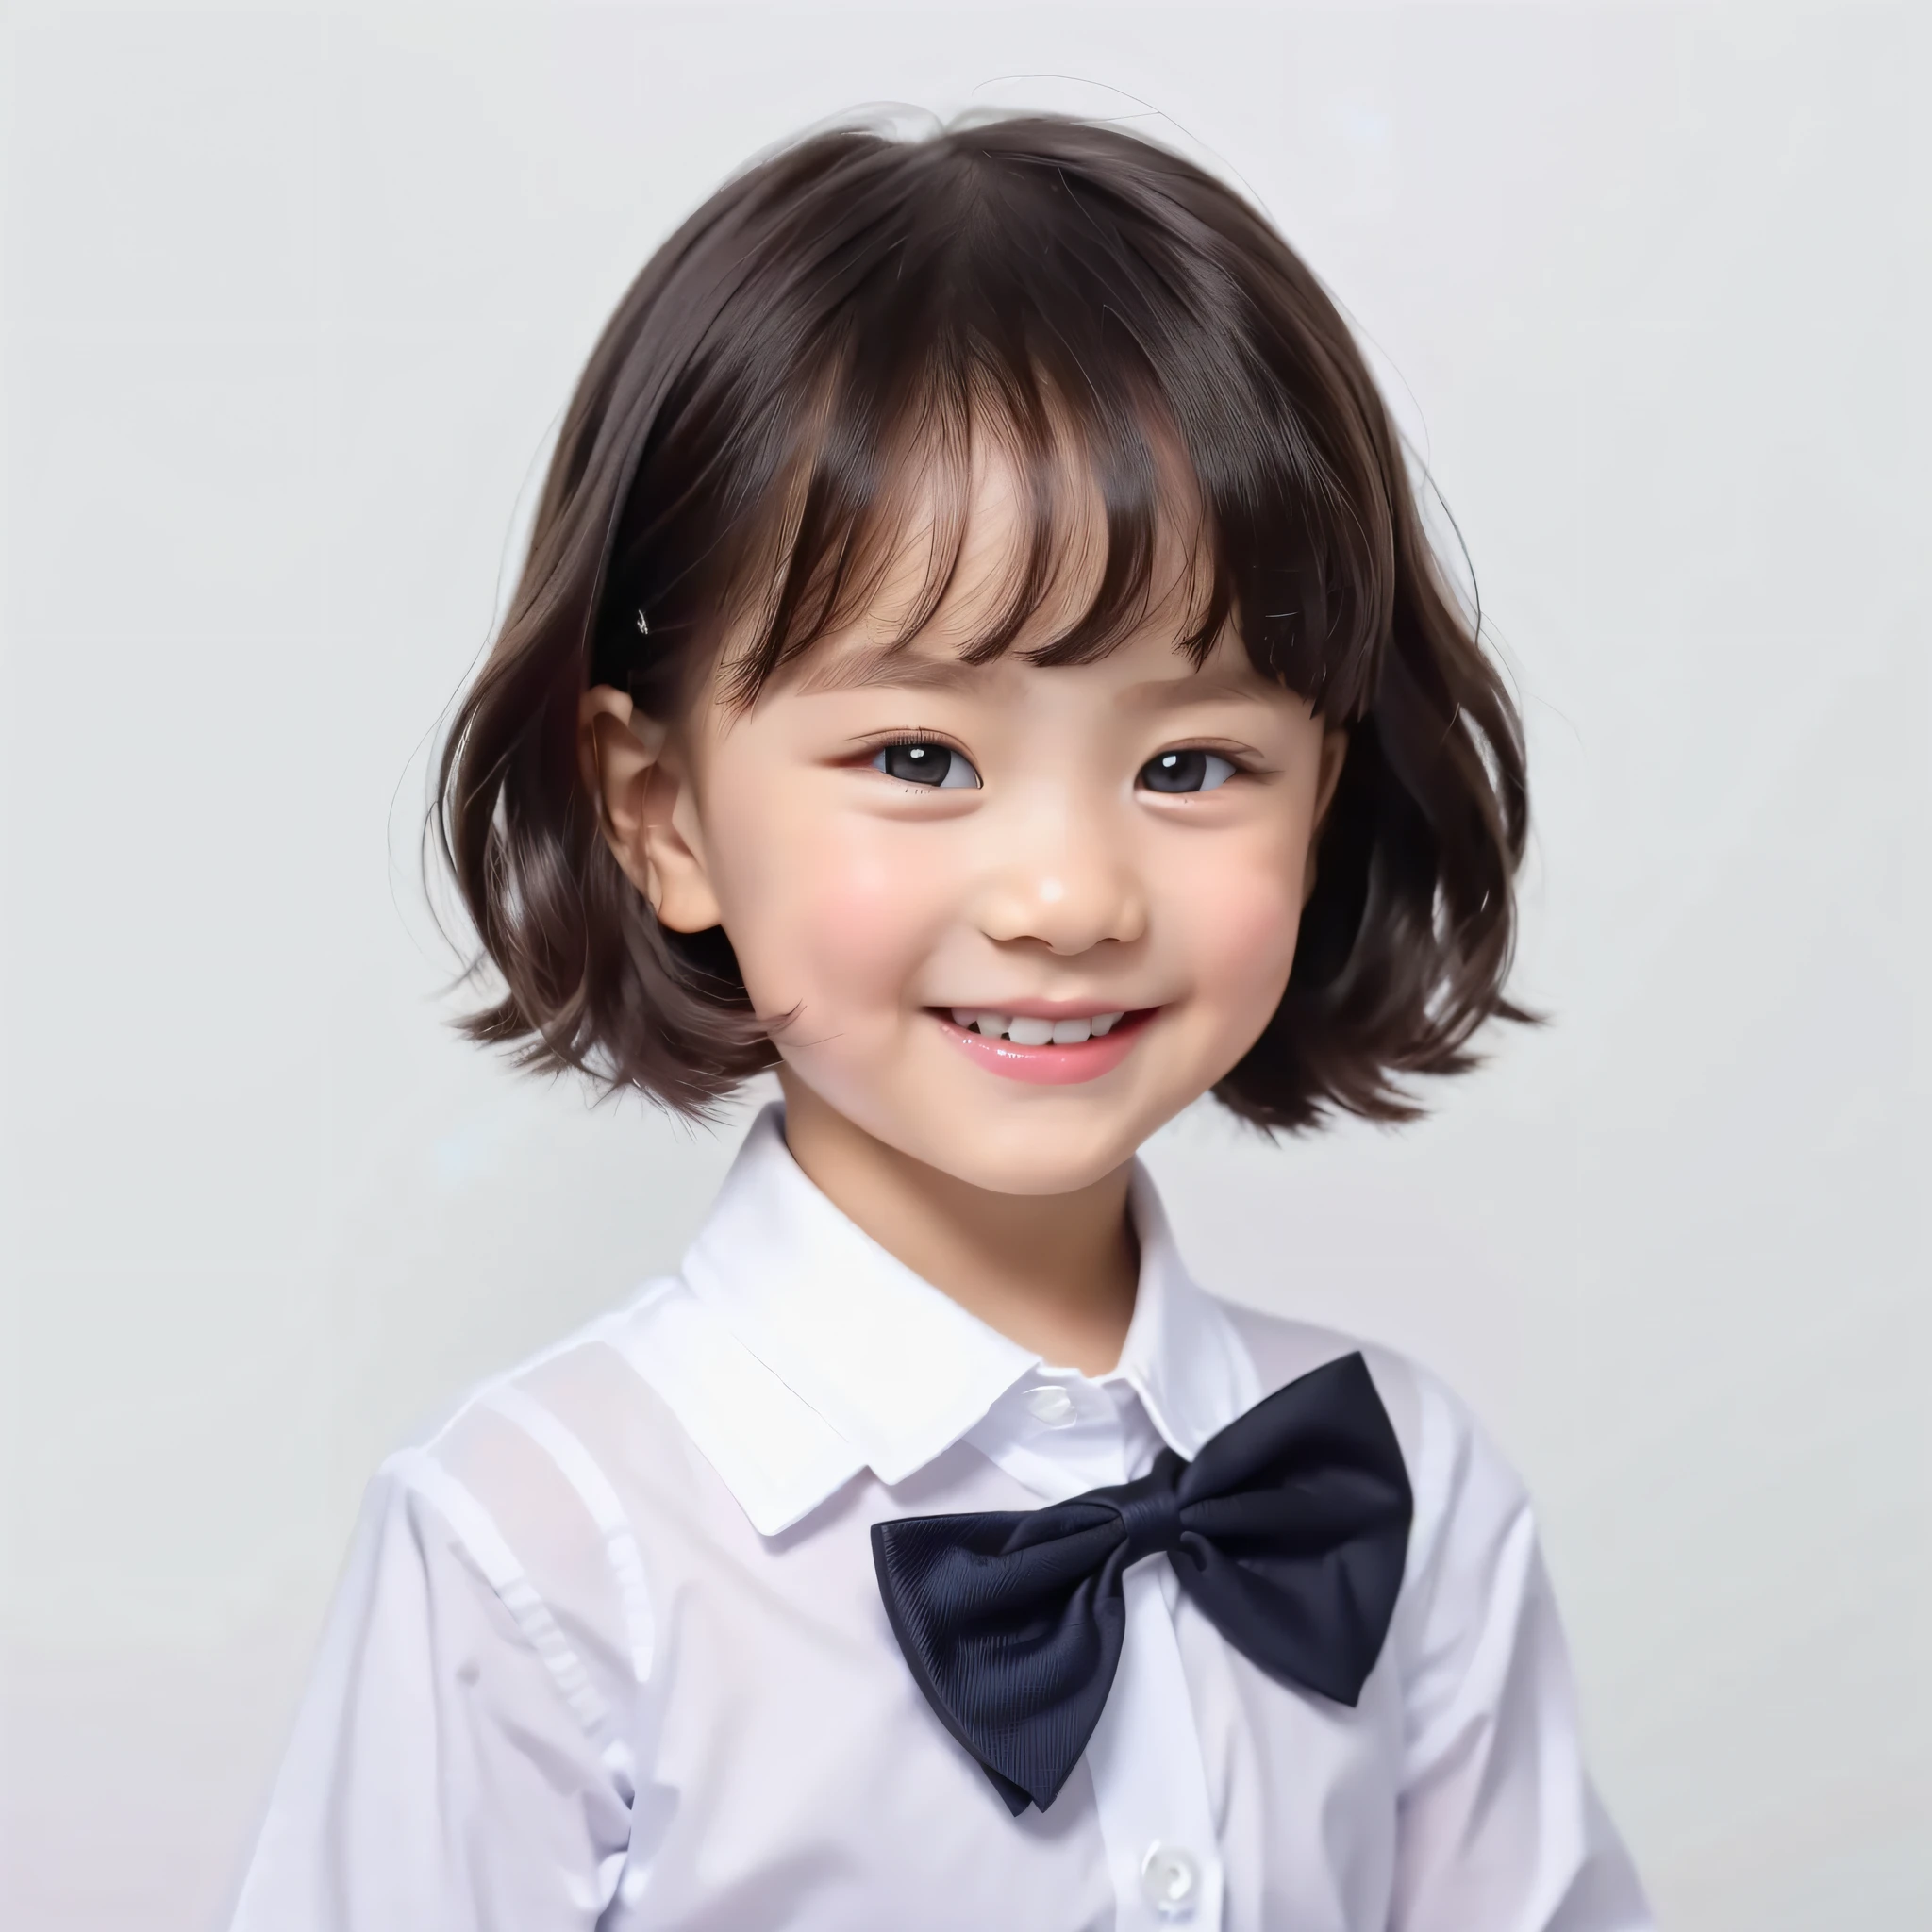 Modern style, white background, children's ID photo, cute, smiling girl, dark eyes, short hair, bow tie, clear, high quality